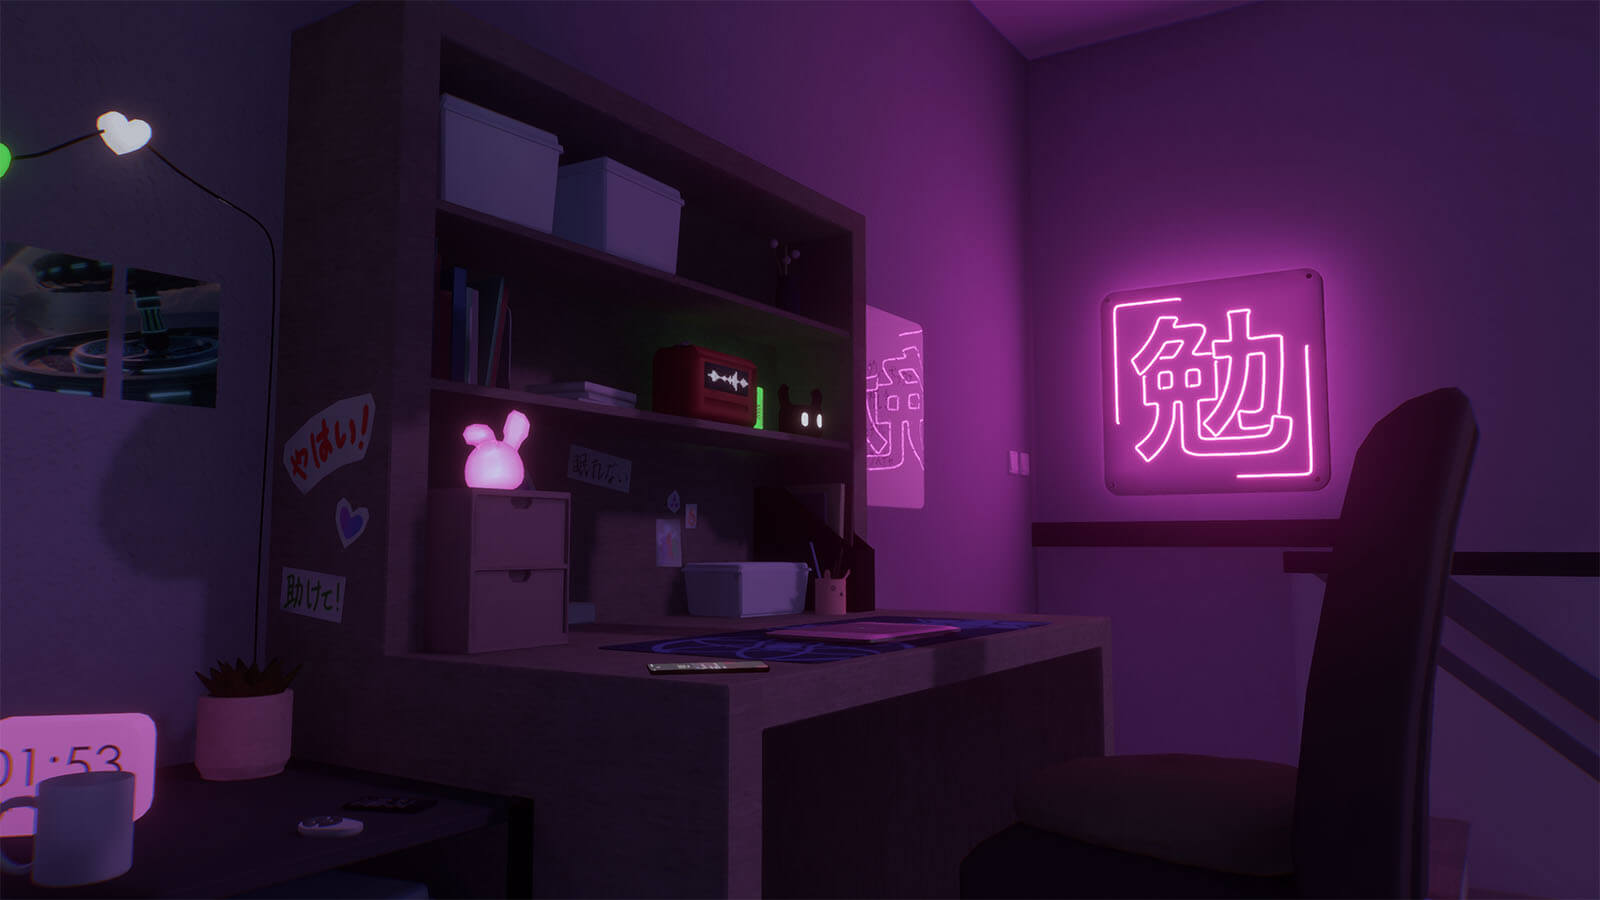 3D scene with a desk illuminated by a neon sign in the shape of a Japanese kanji